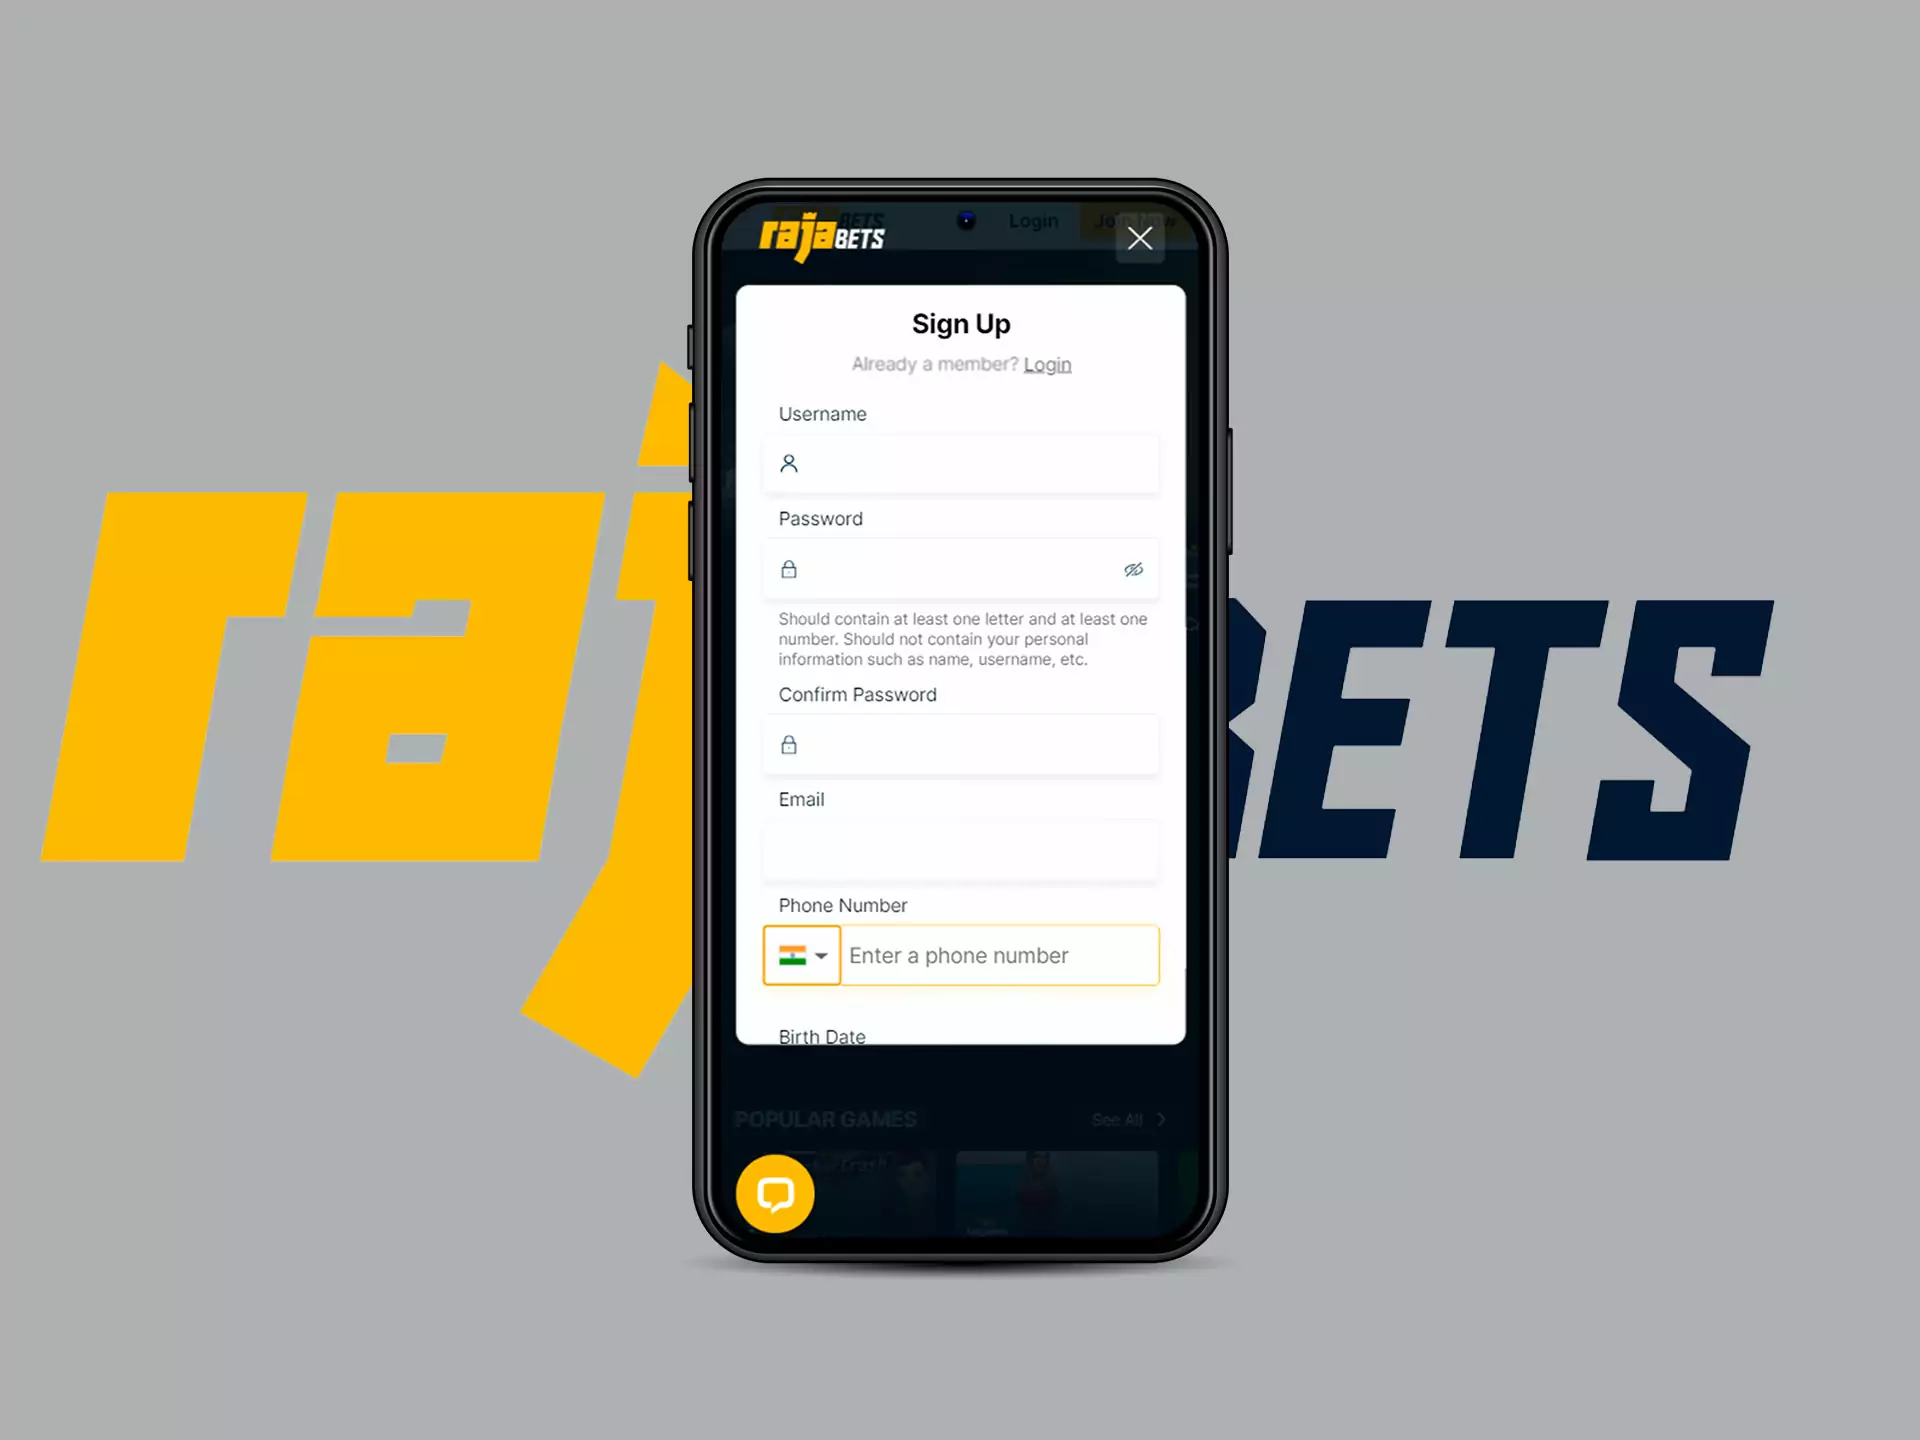 Create an account in the handy Rajabets mobile app.